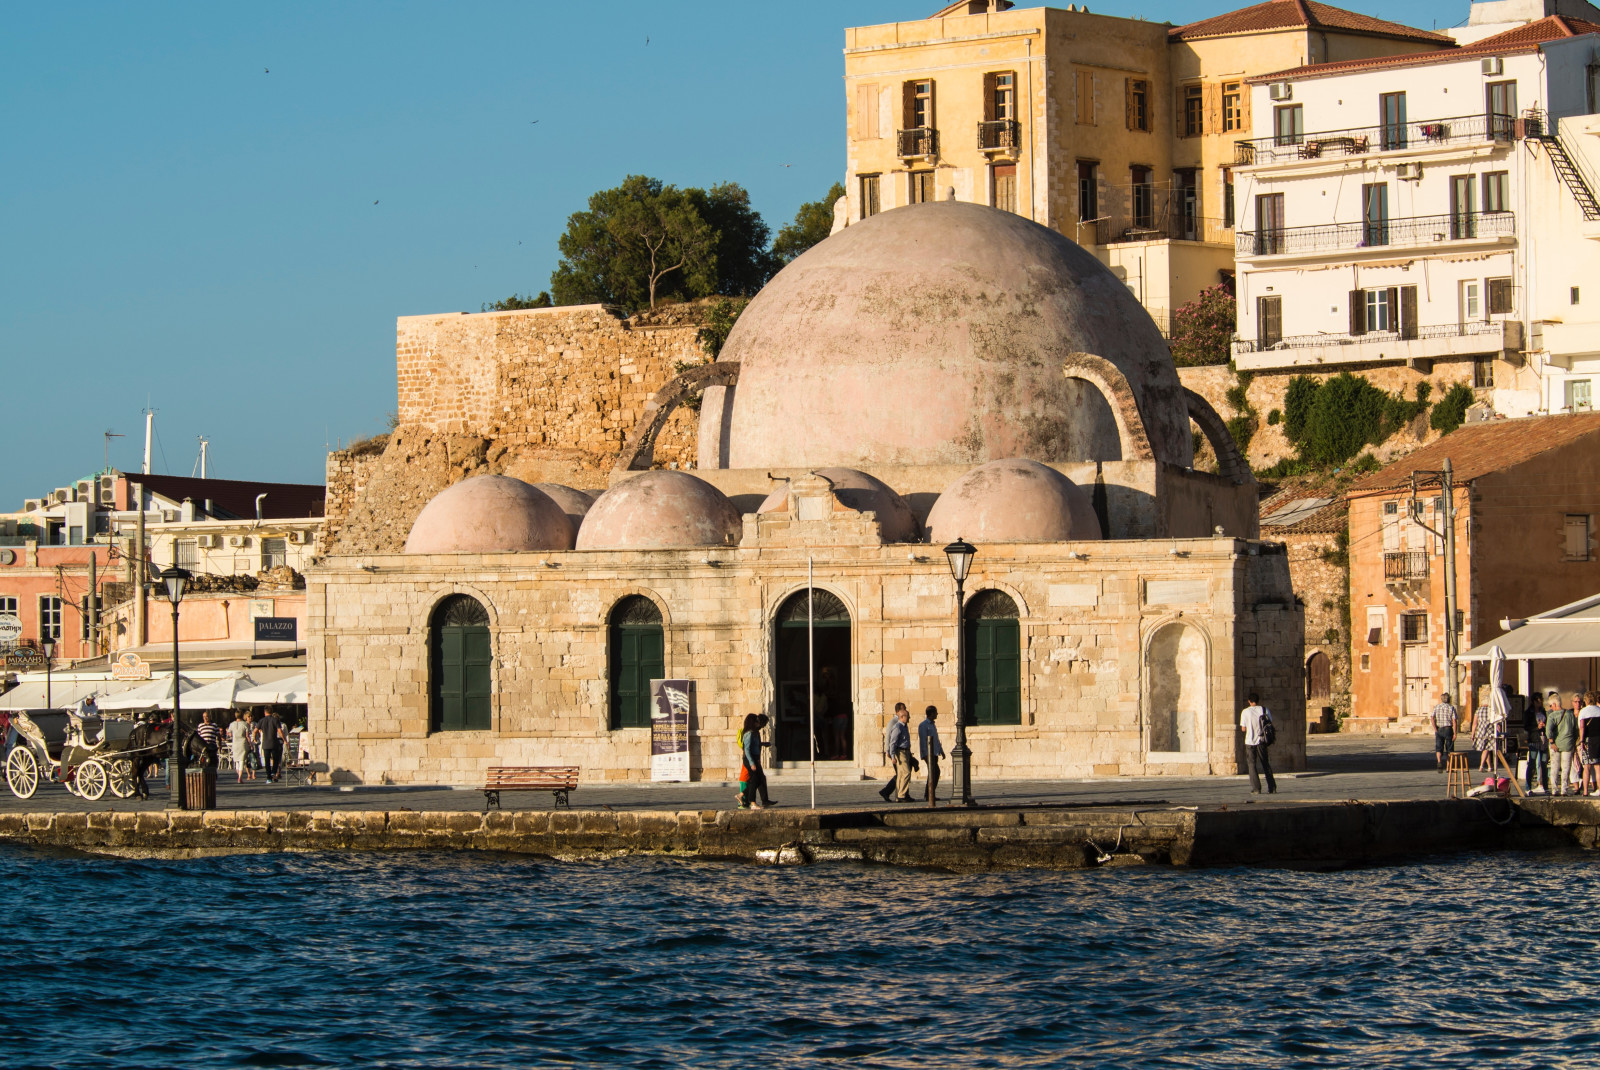 blue water and skies with white and tan ancient rounded buildings and a green leafy tree Crete old city Heraklion